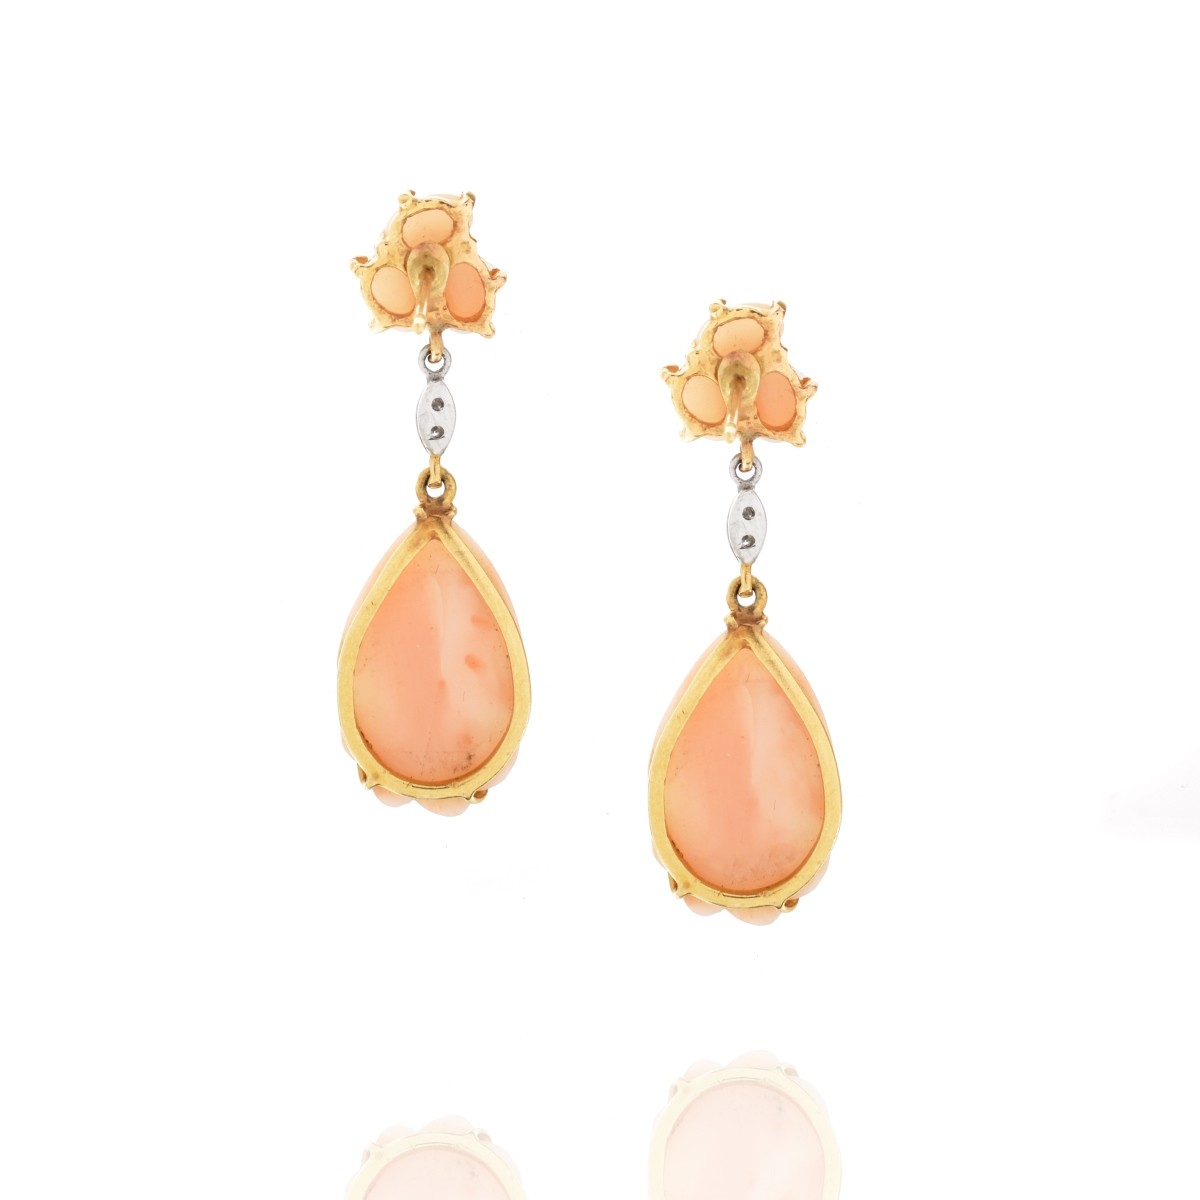 Coral, Diamond and 14K Earrings